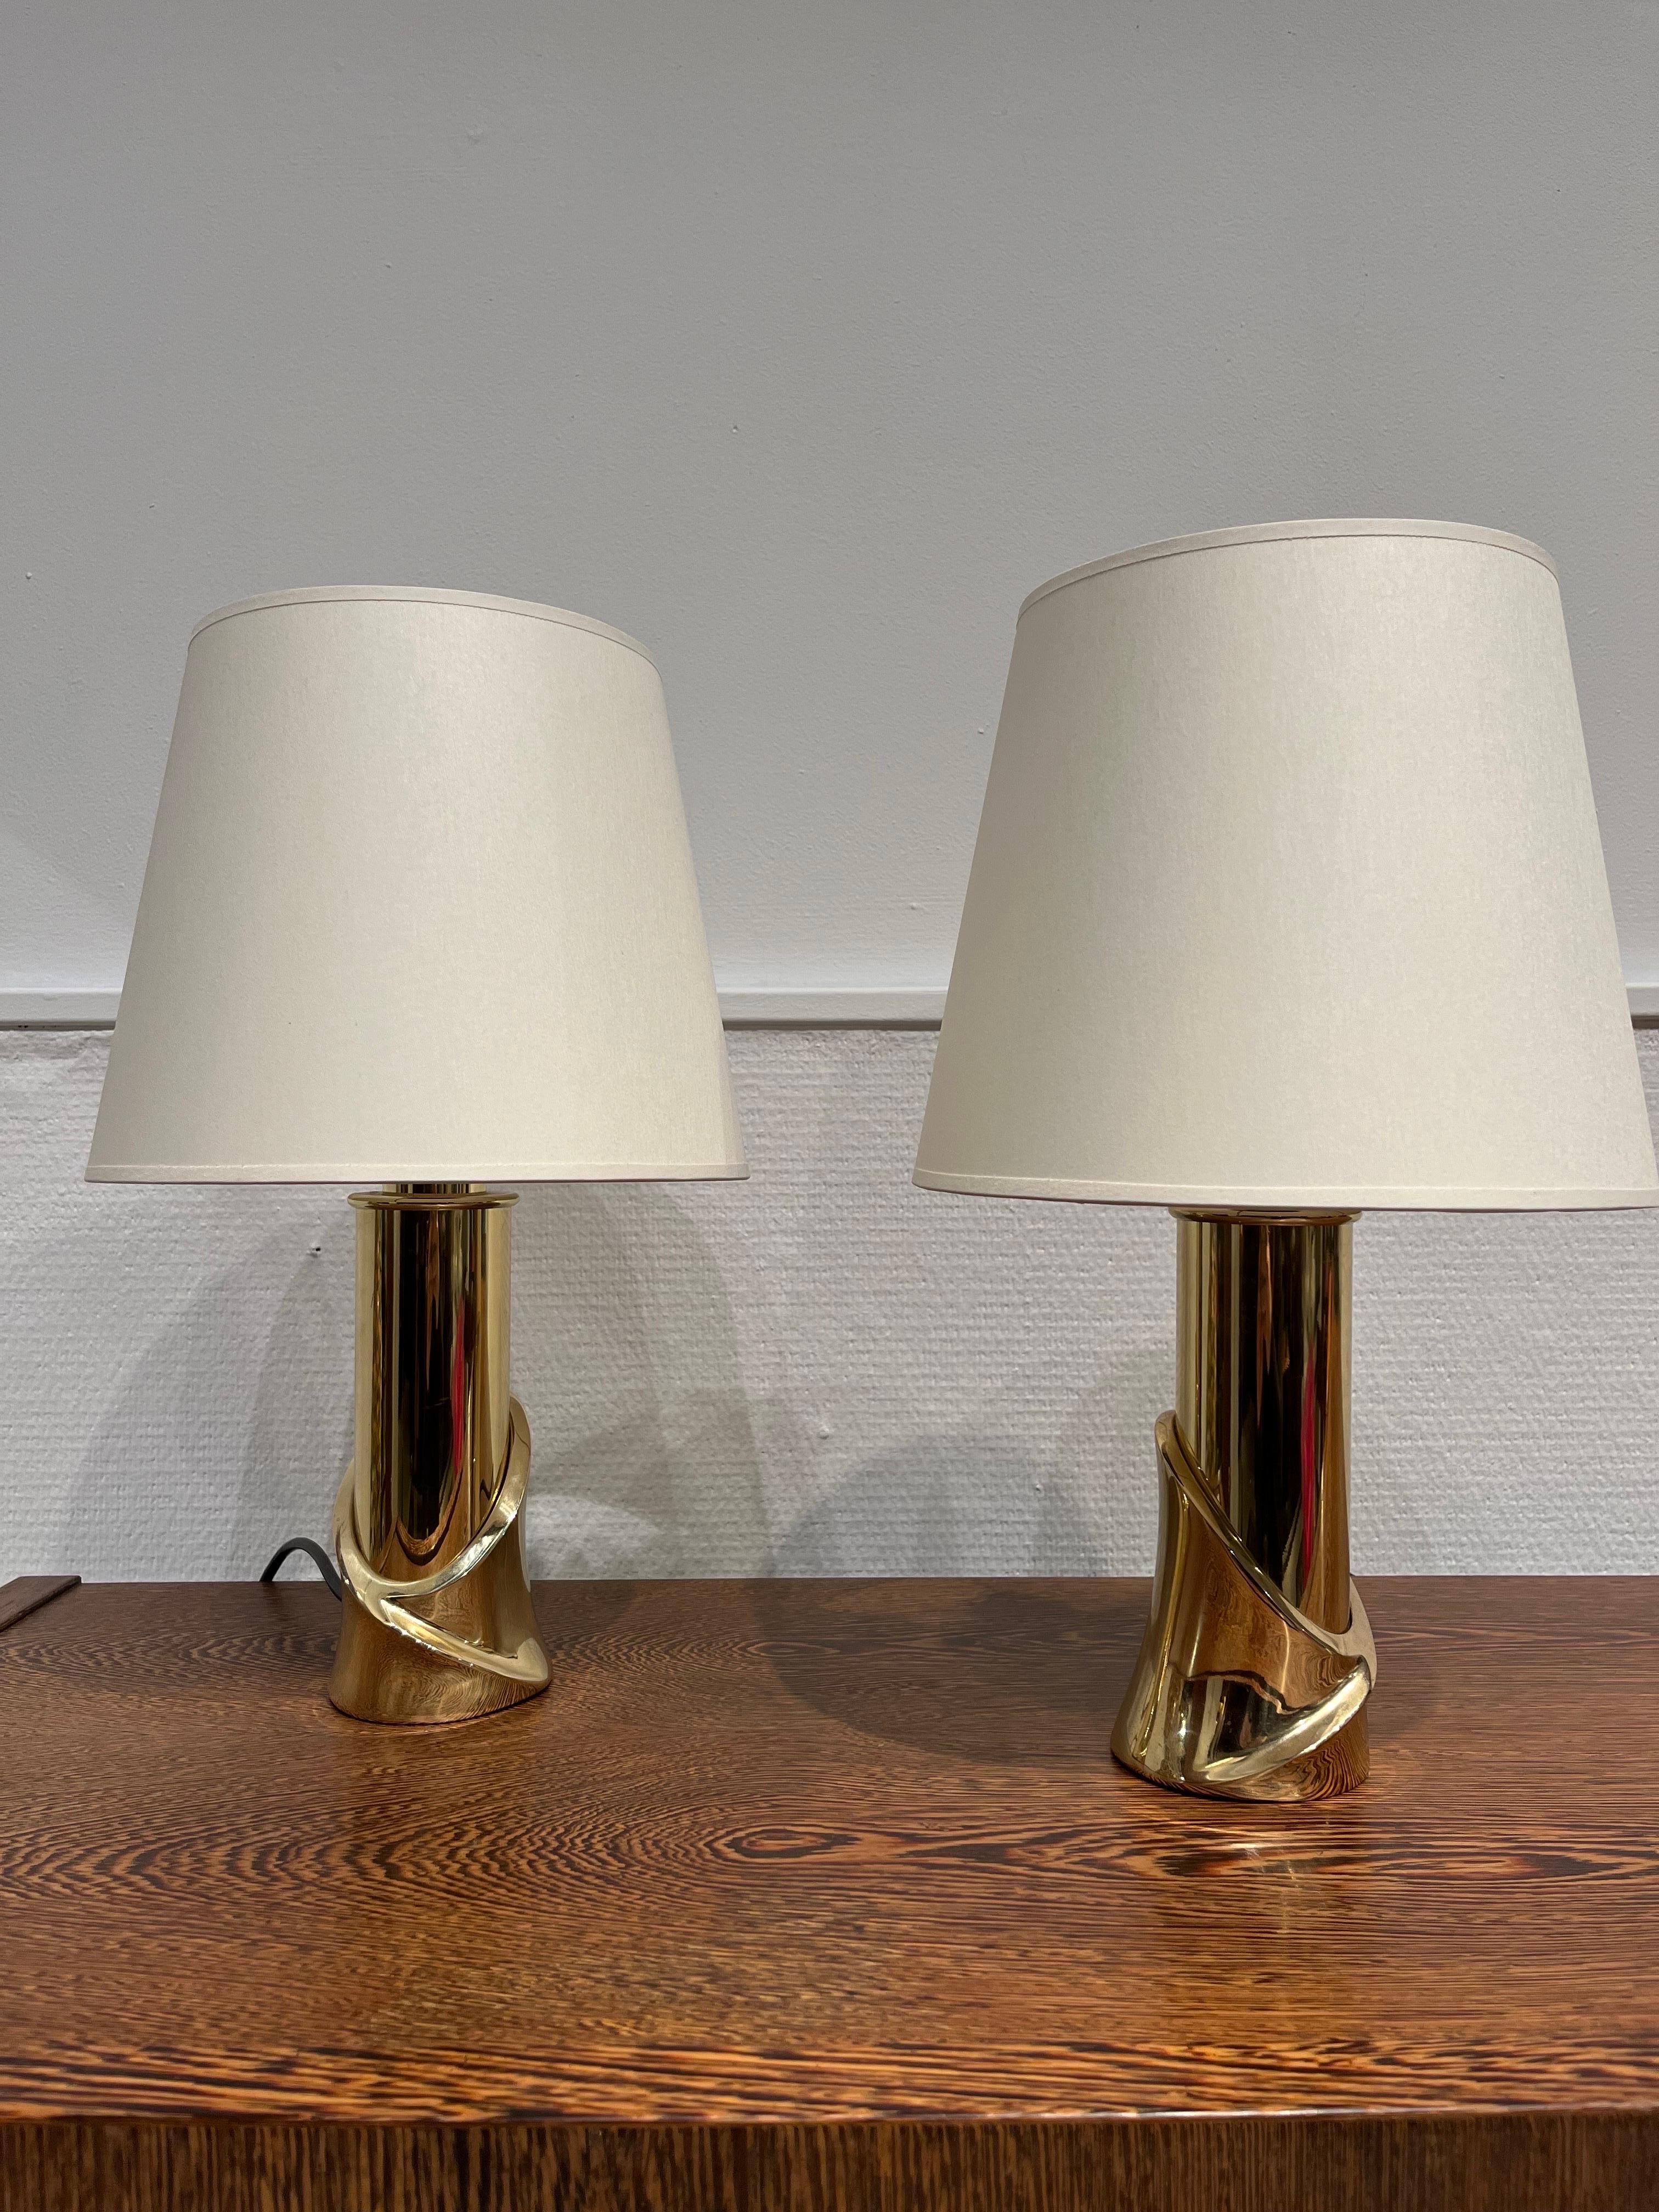 Luciano Frigerio is an Italian designer active in the 1960-80s. The elegant pair of brass lamp dates from the 1970s. This pair was designed as bed side lamps.